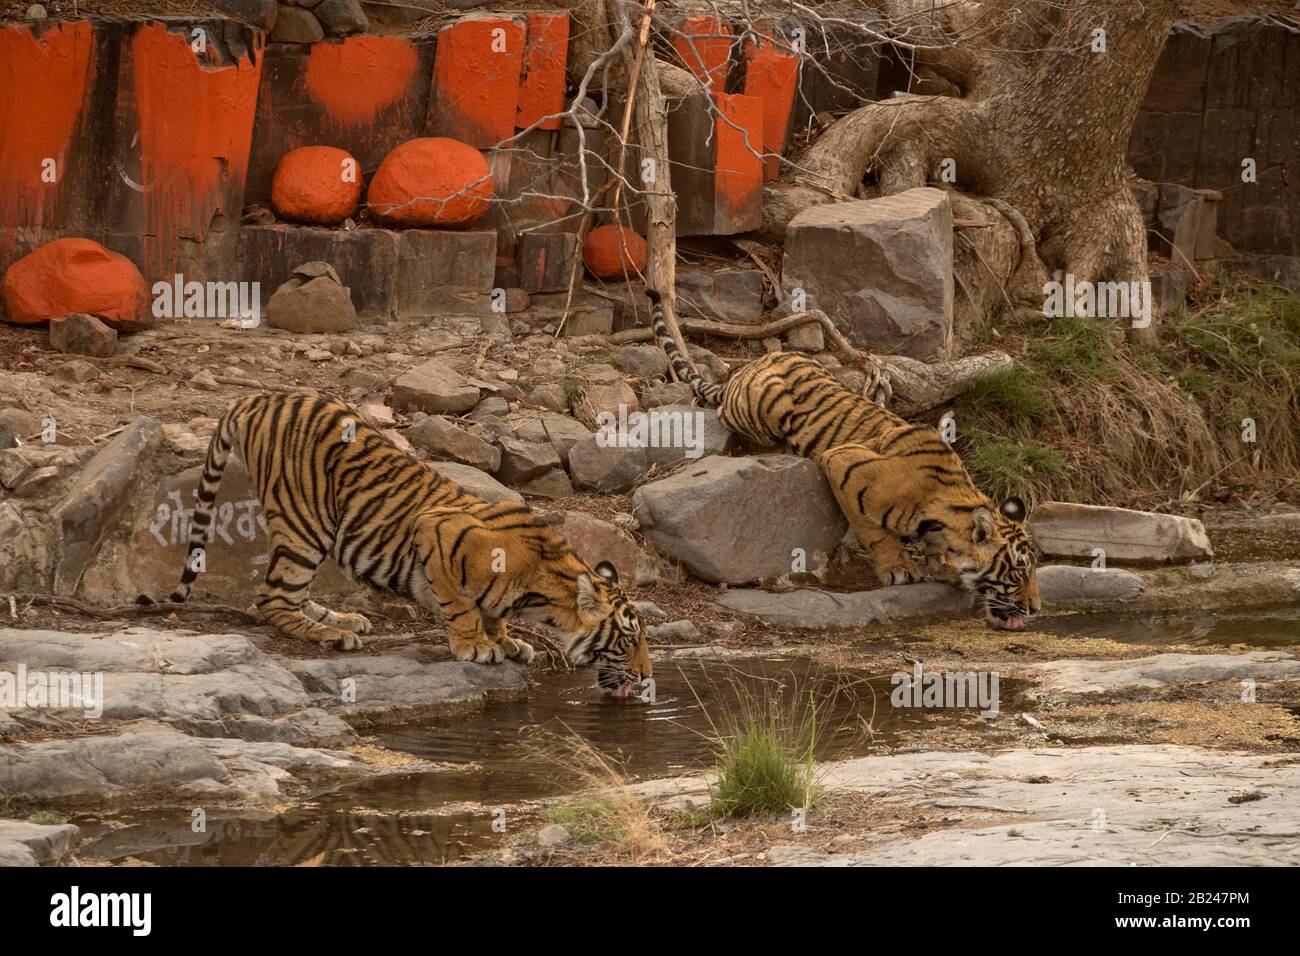 Two wild tigers (Panthera tigris tigris) drinking water from a rocky puddle near a Hindu temple, Ranthambore National Park, Rajasthan, Inida Stock Photo